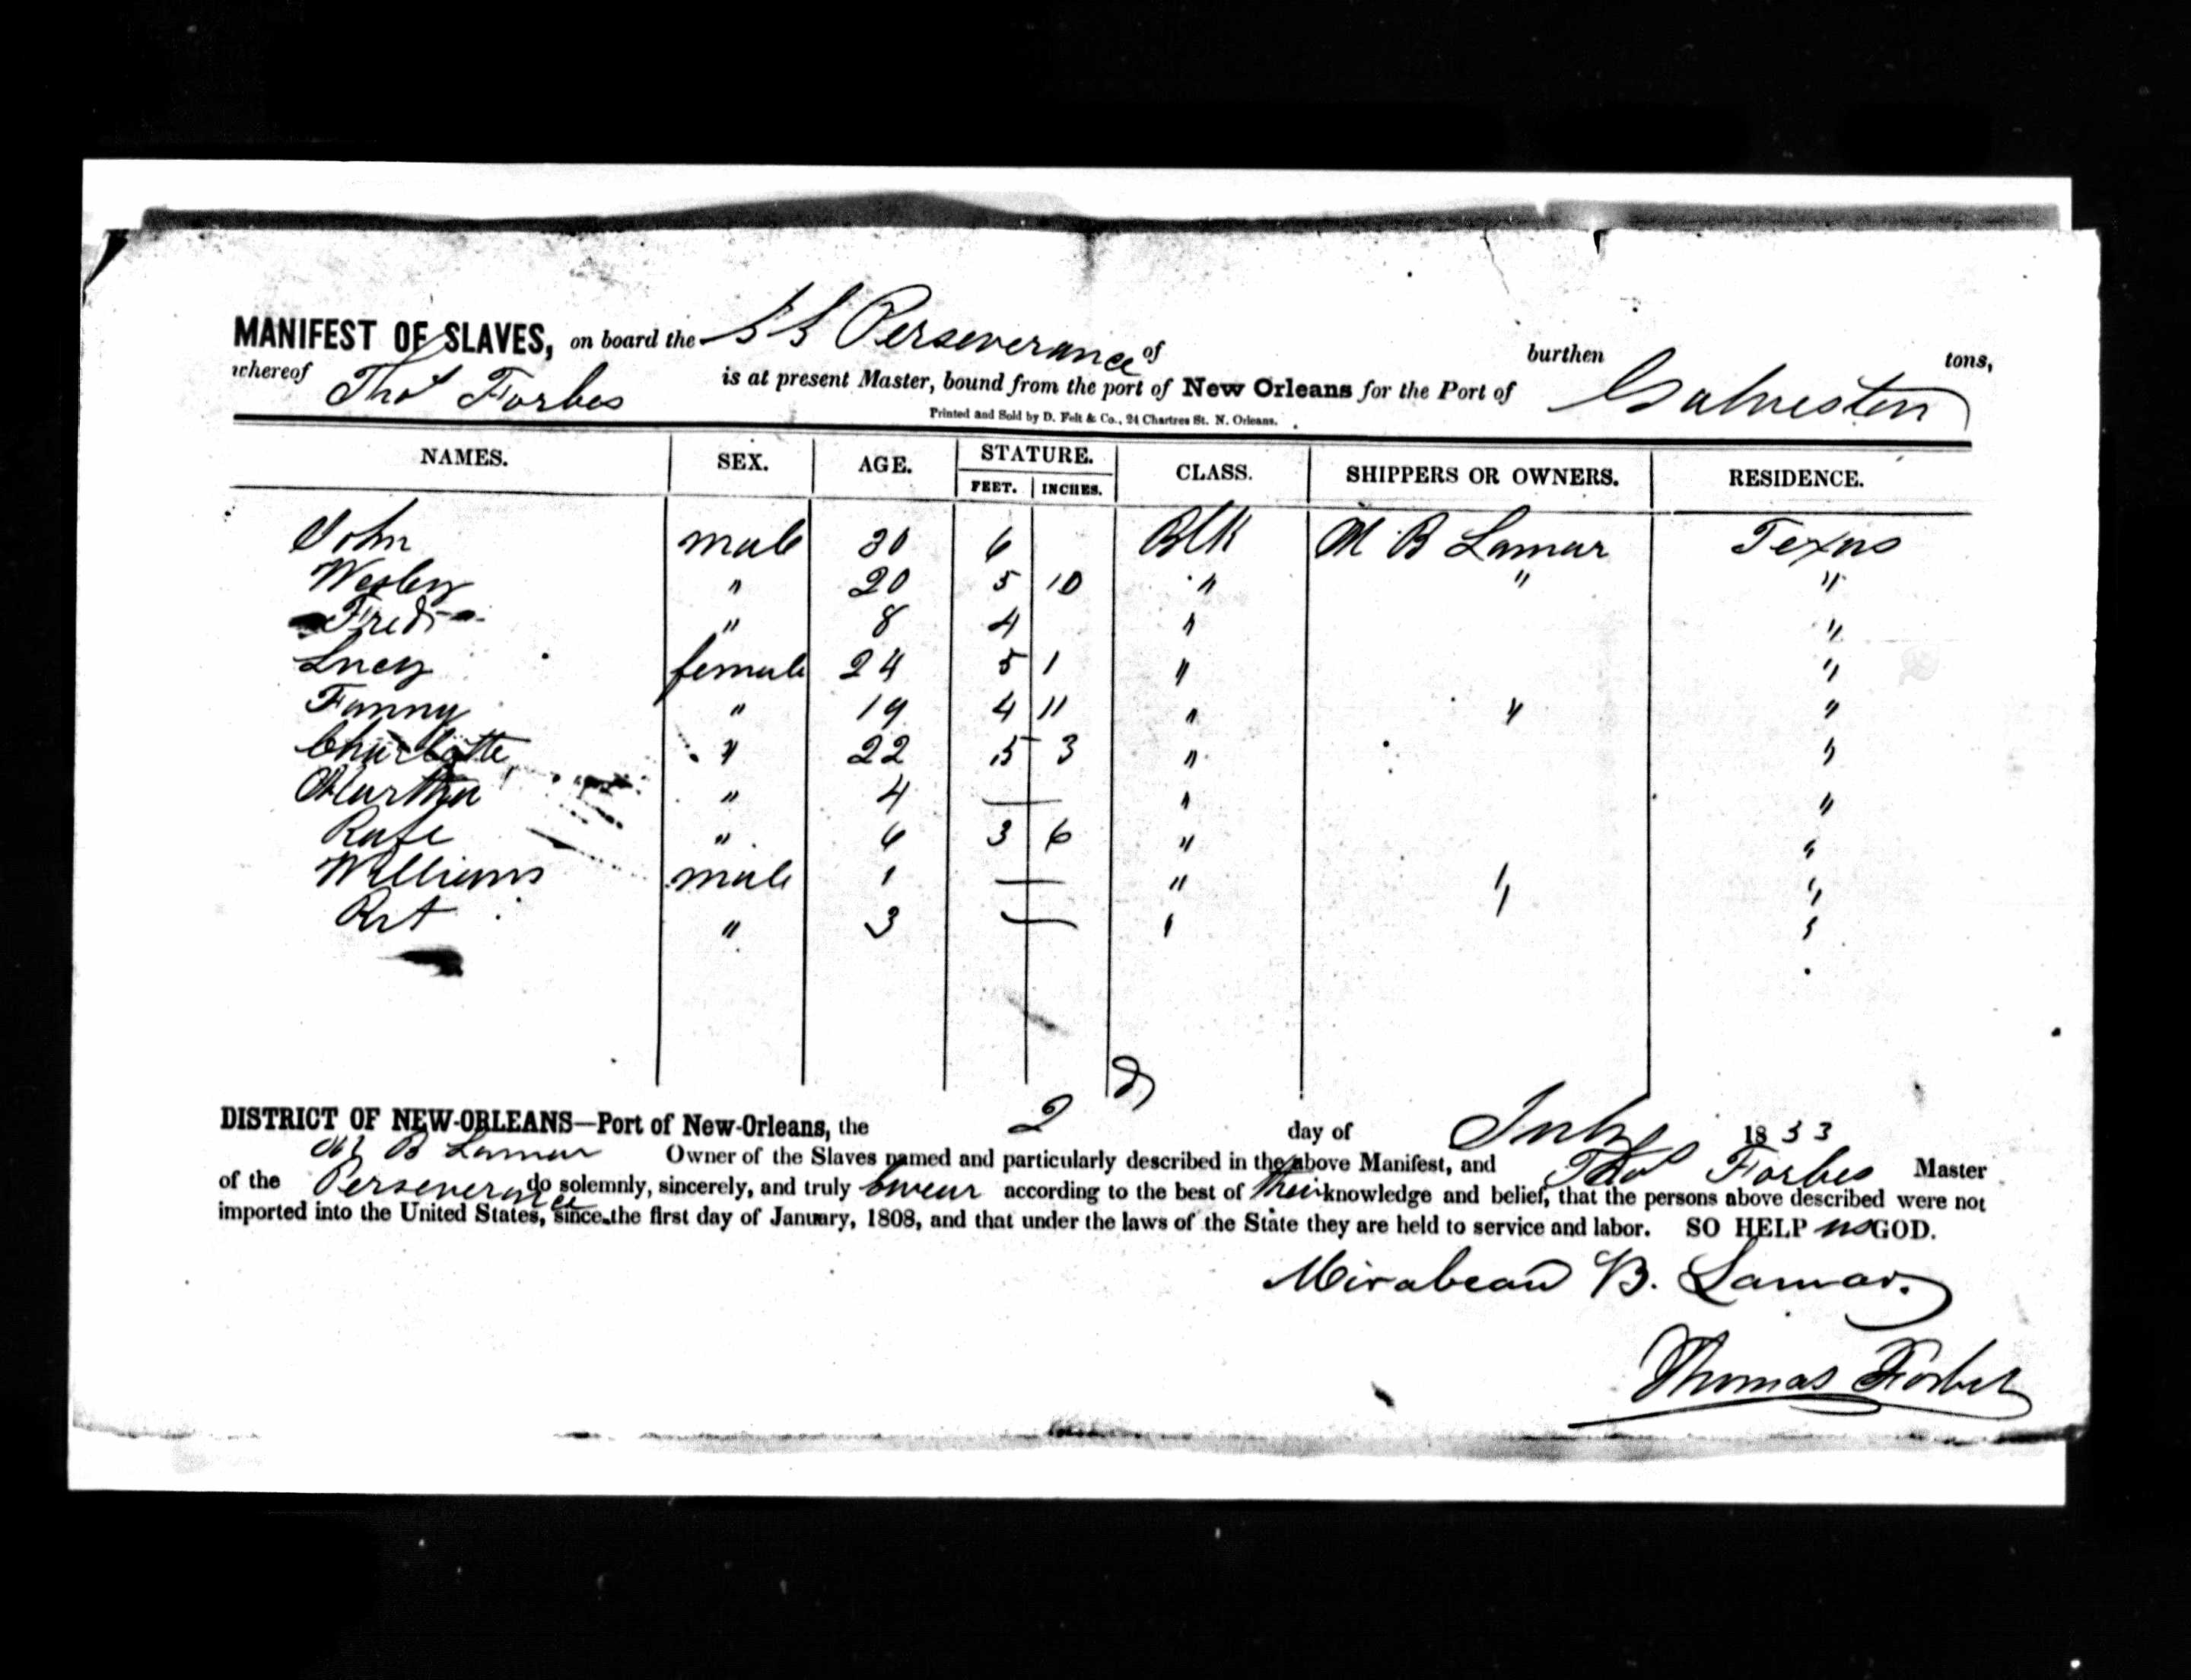 Ship manifest for the S. S. Perseverance dated July 2, 1833 noting the transportation of ten enslaved people.